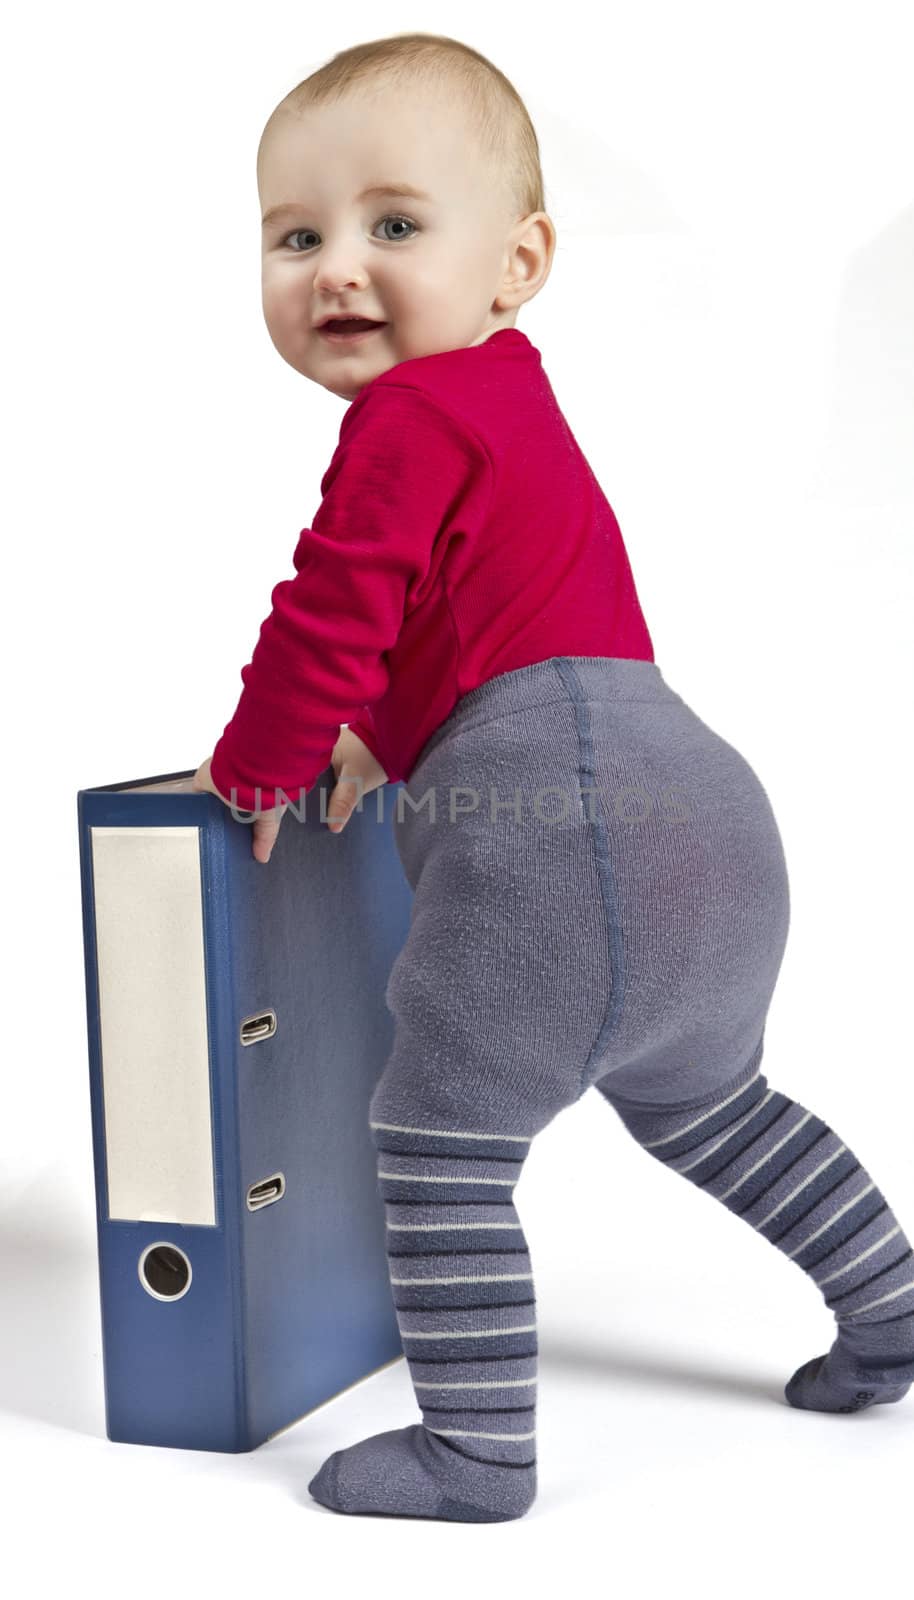 small child standing next to blue ring binder by gewoldi